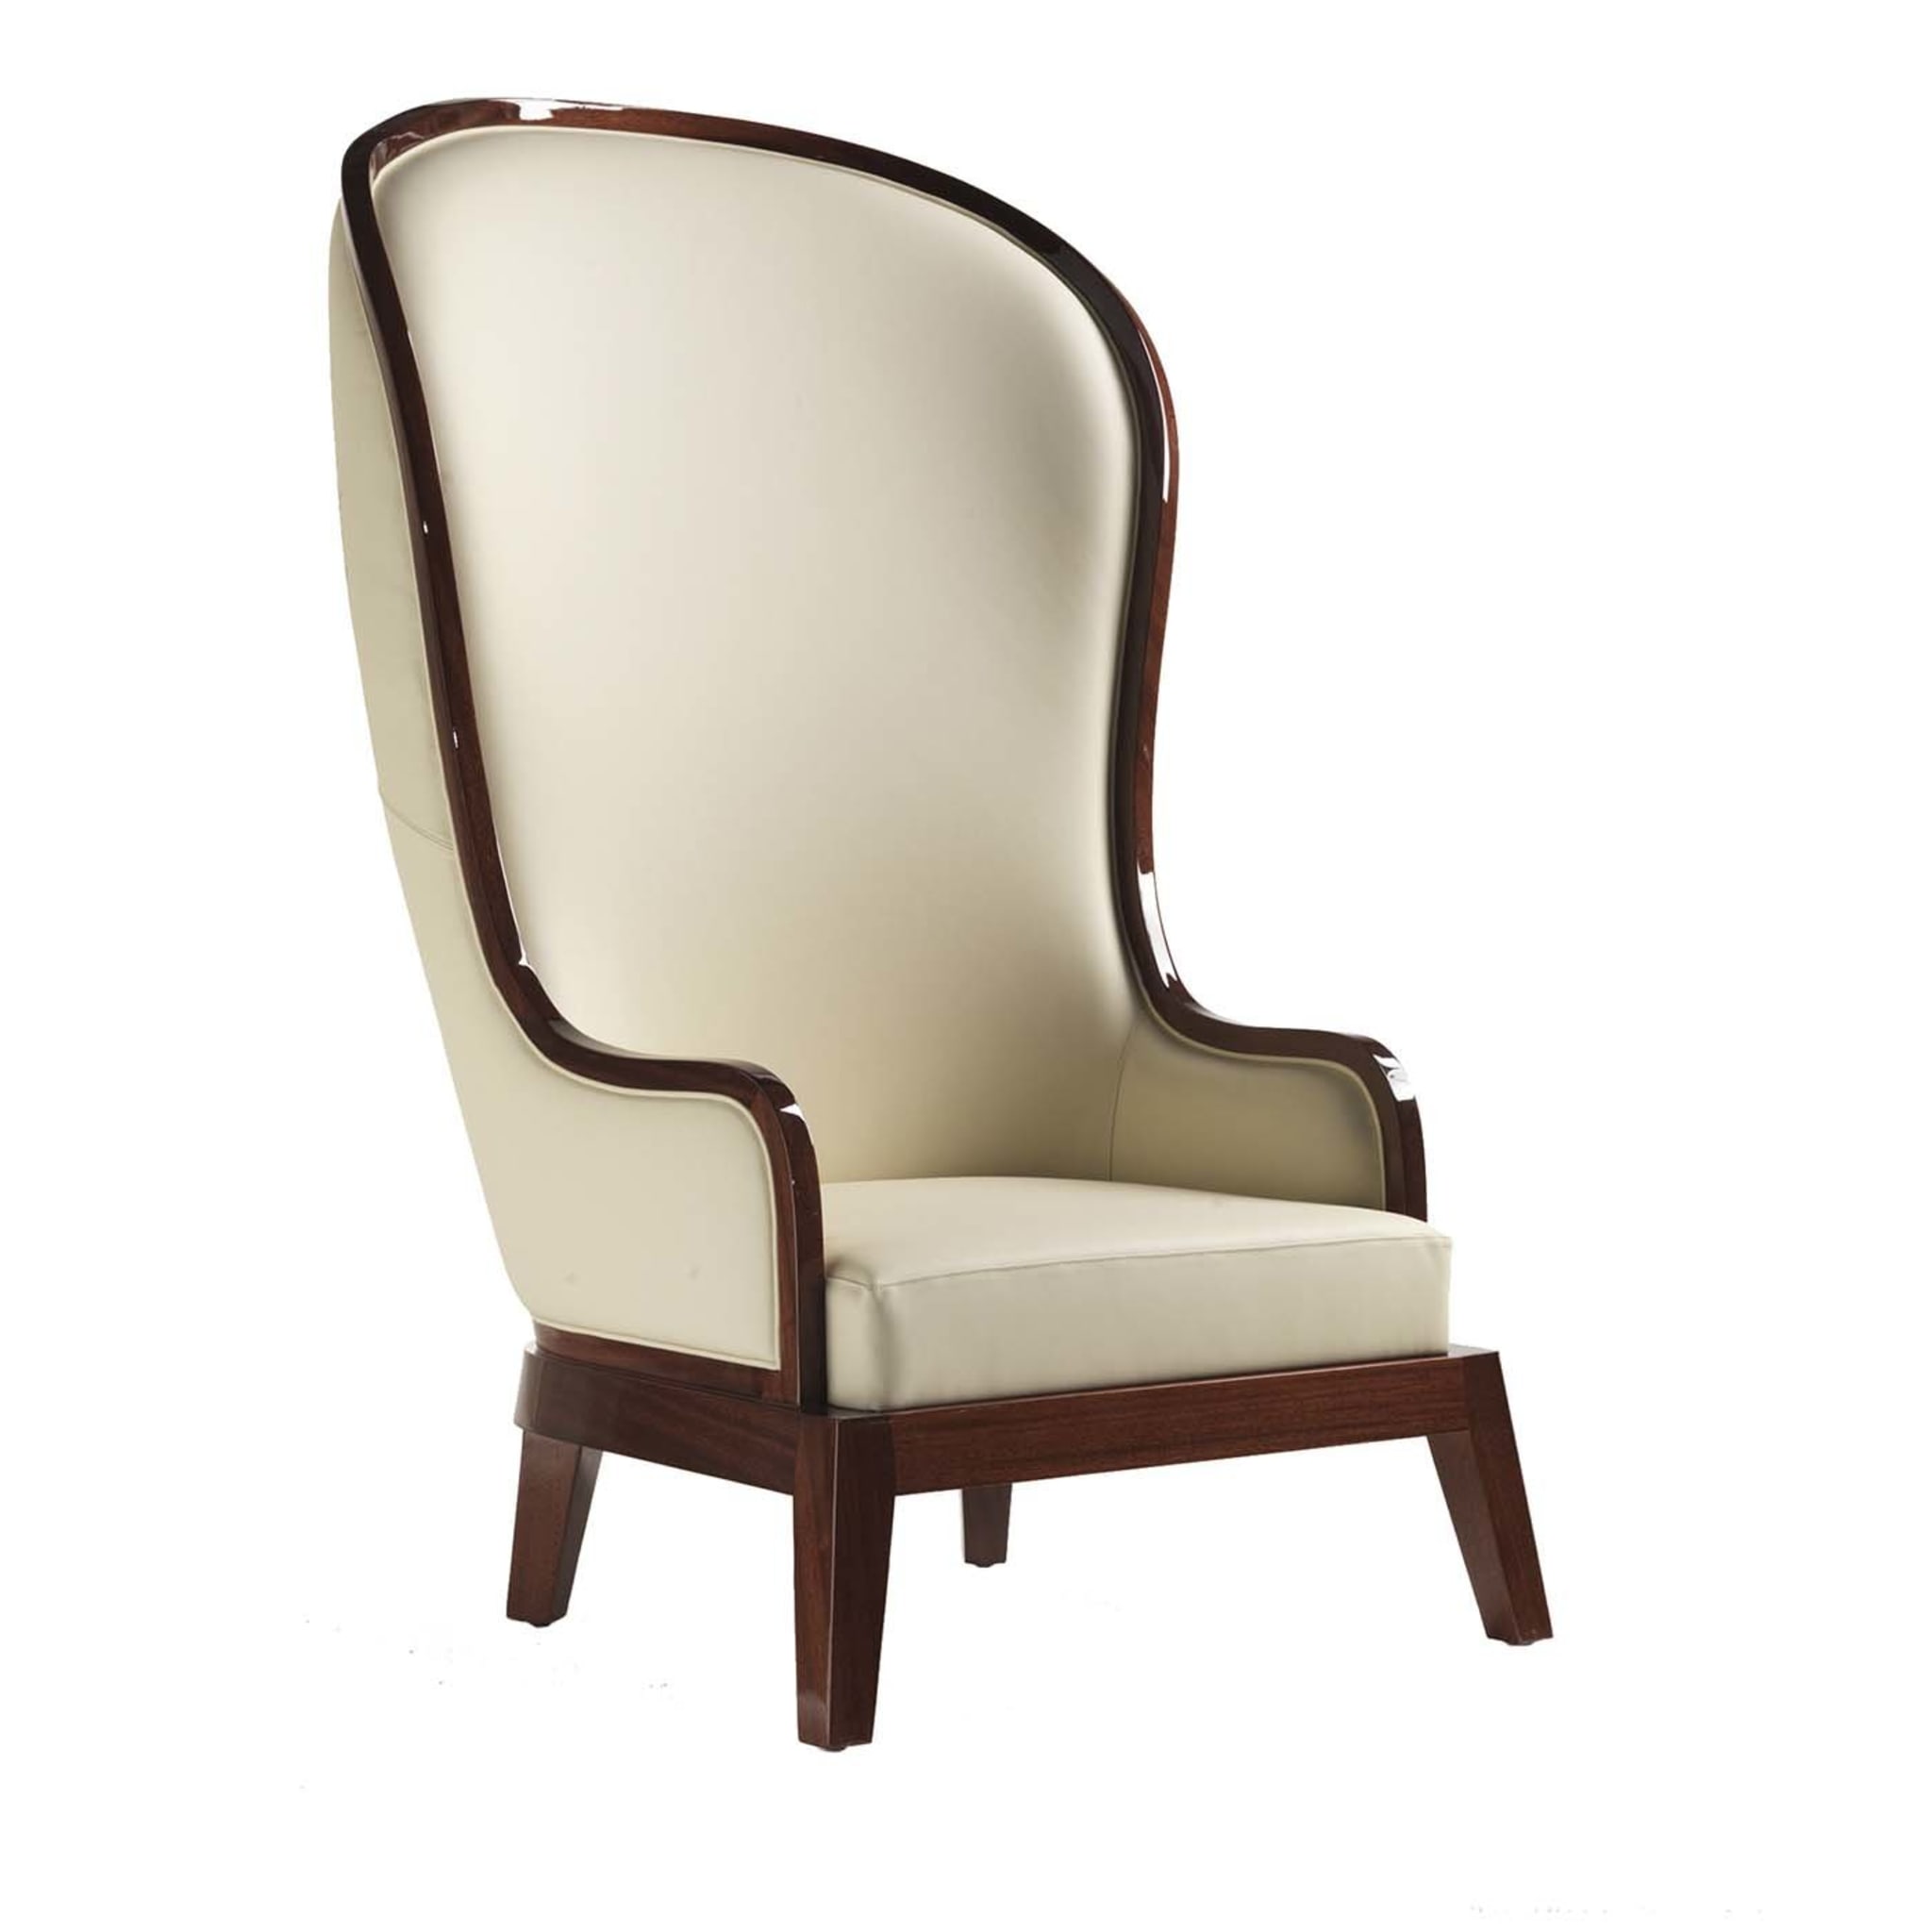 Duchesse of Home White Armchair by Archer Humphryes Architects - Main view